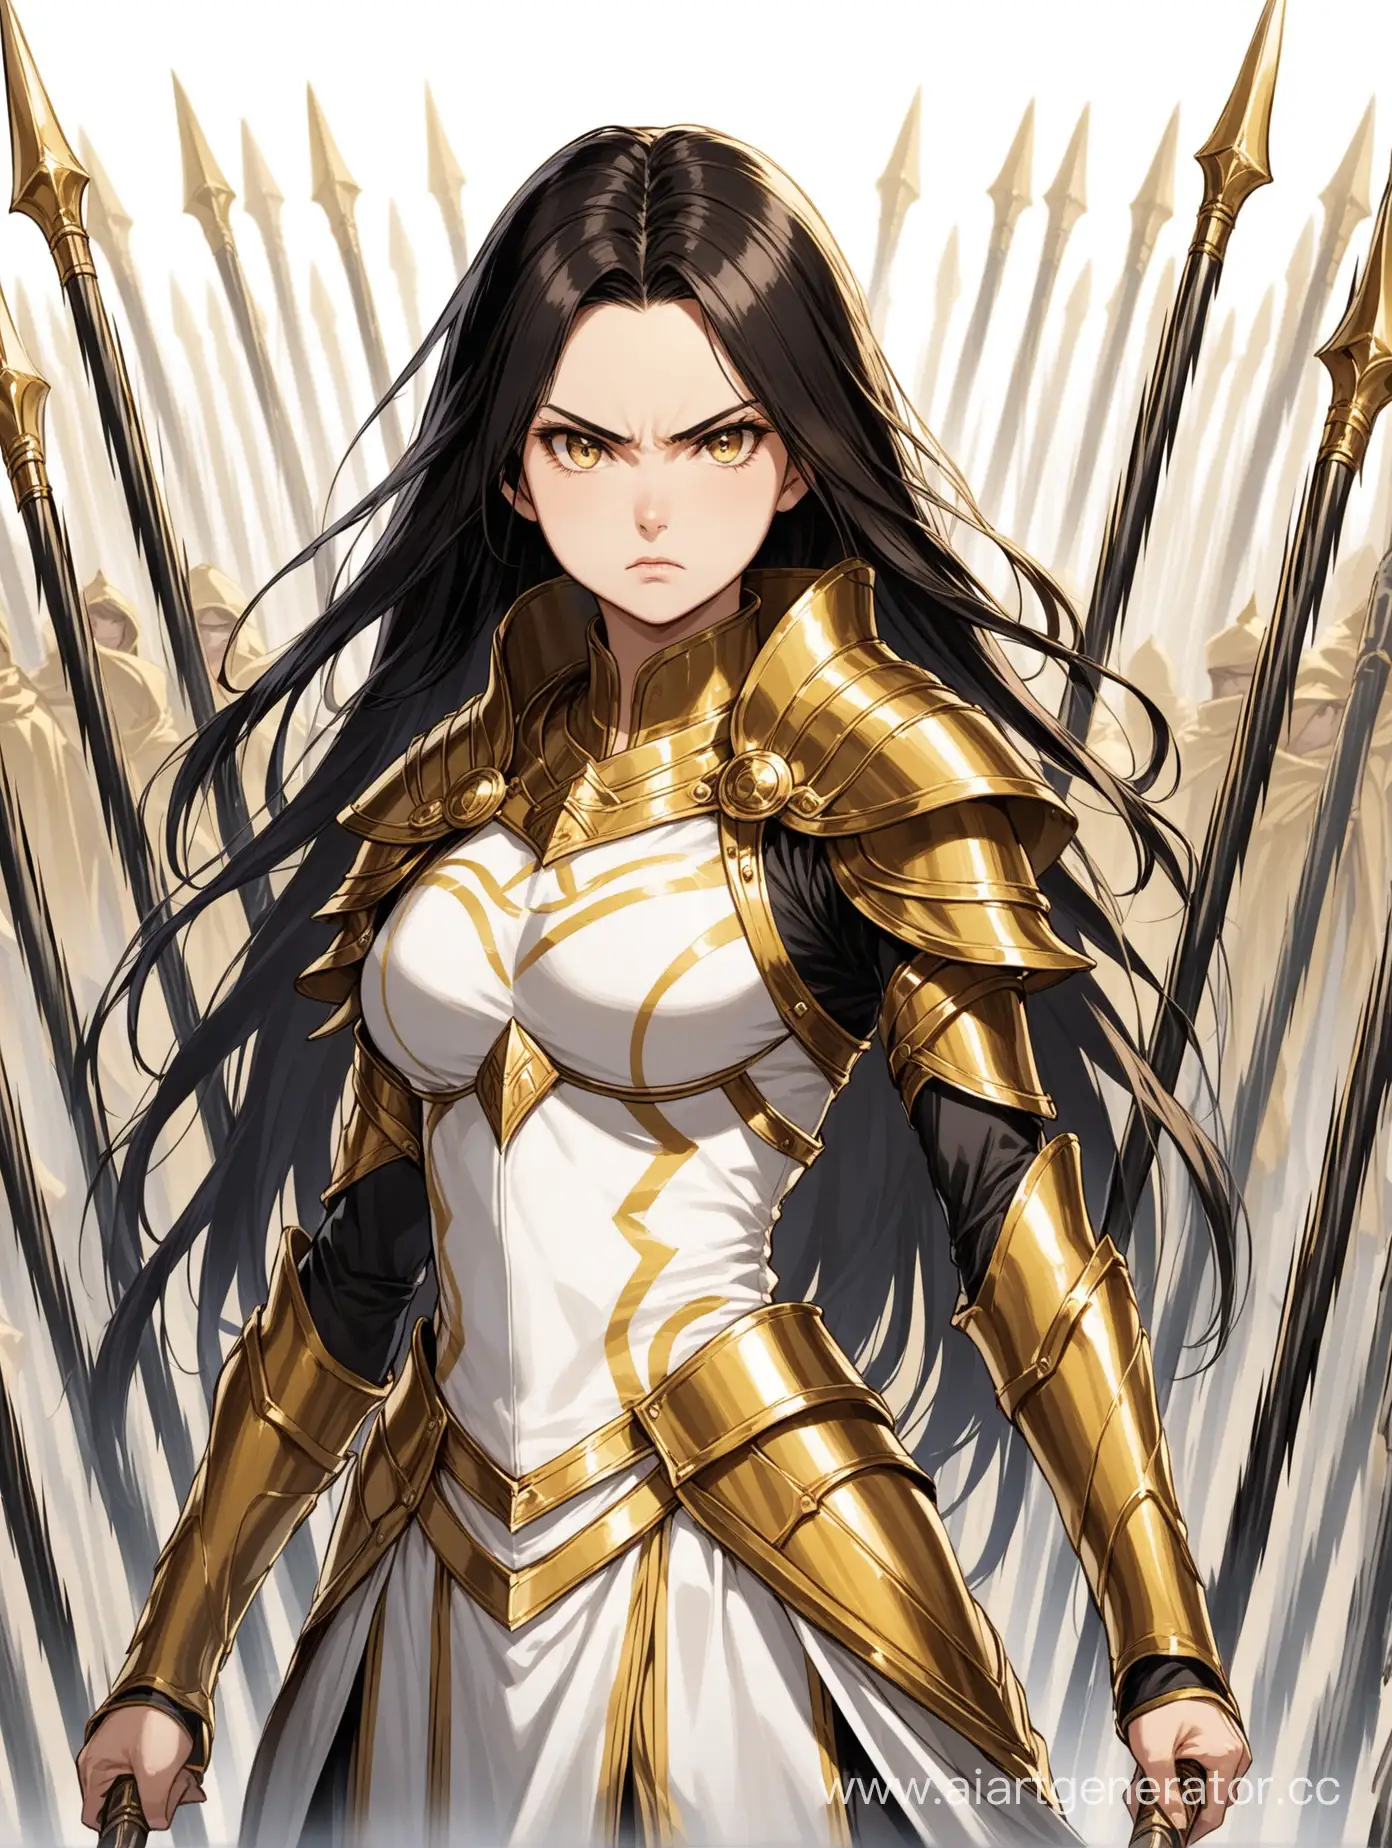 Serious-DarkHaired-Girl-in-WhiteGolden-Attire-with-Dual-Spears